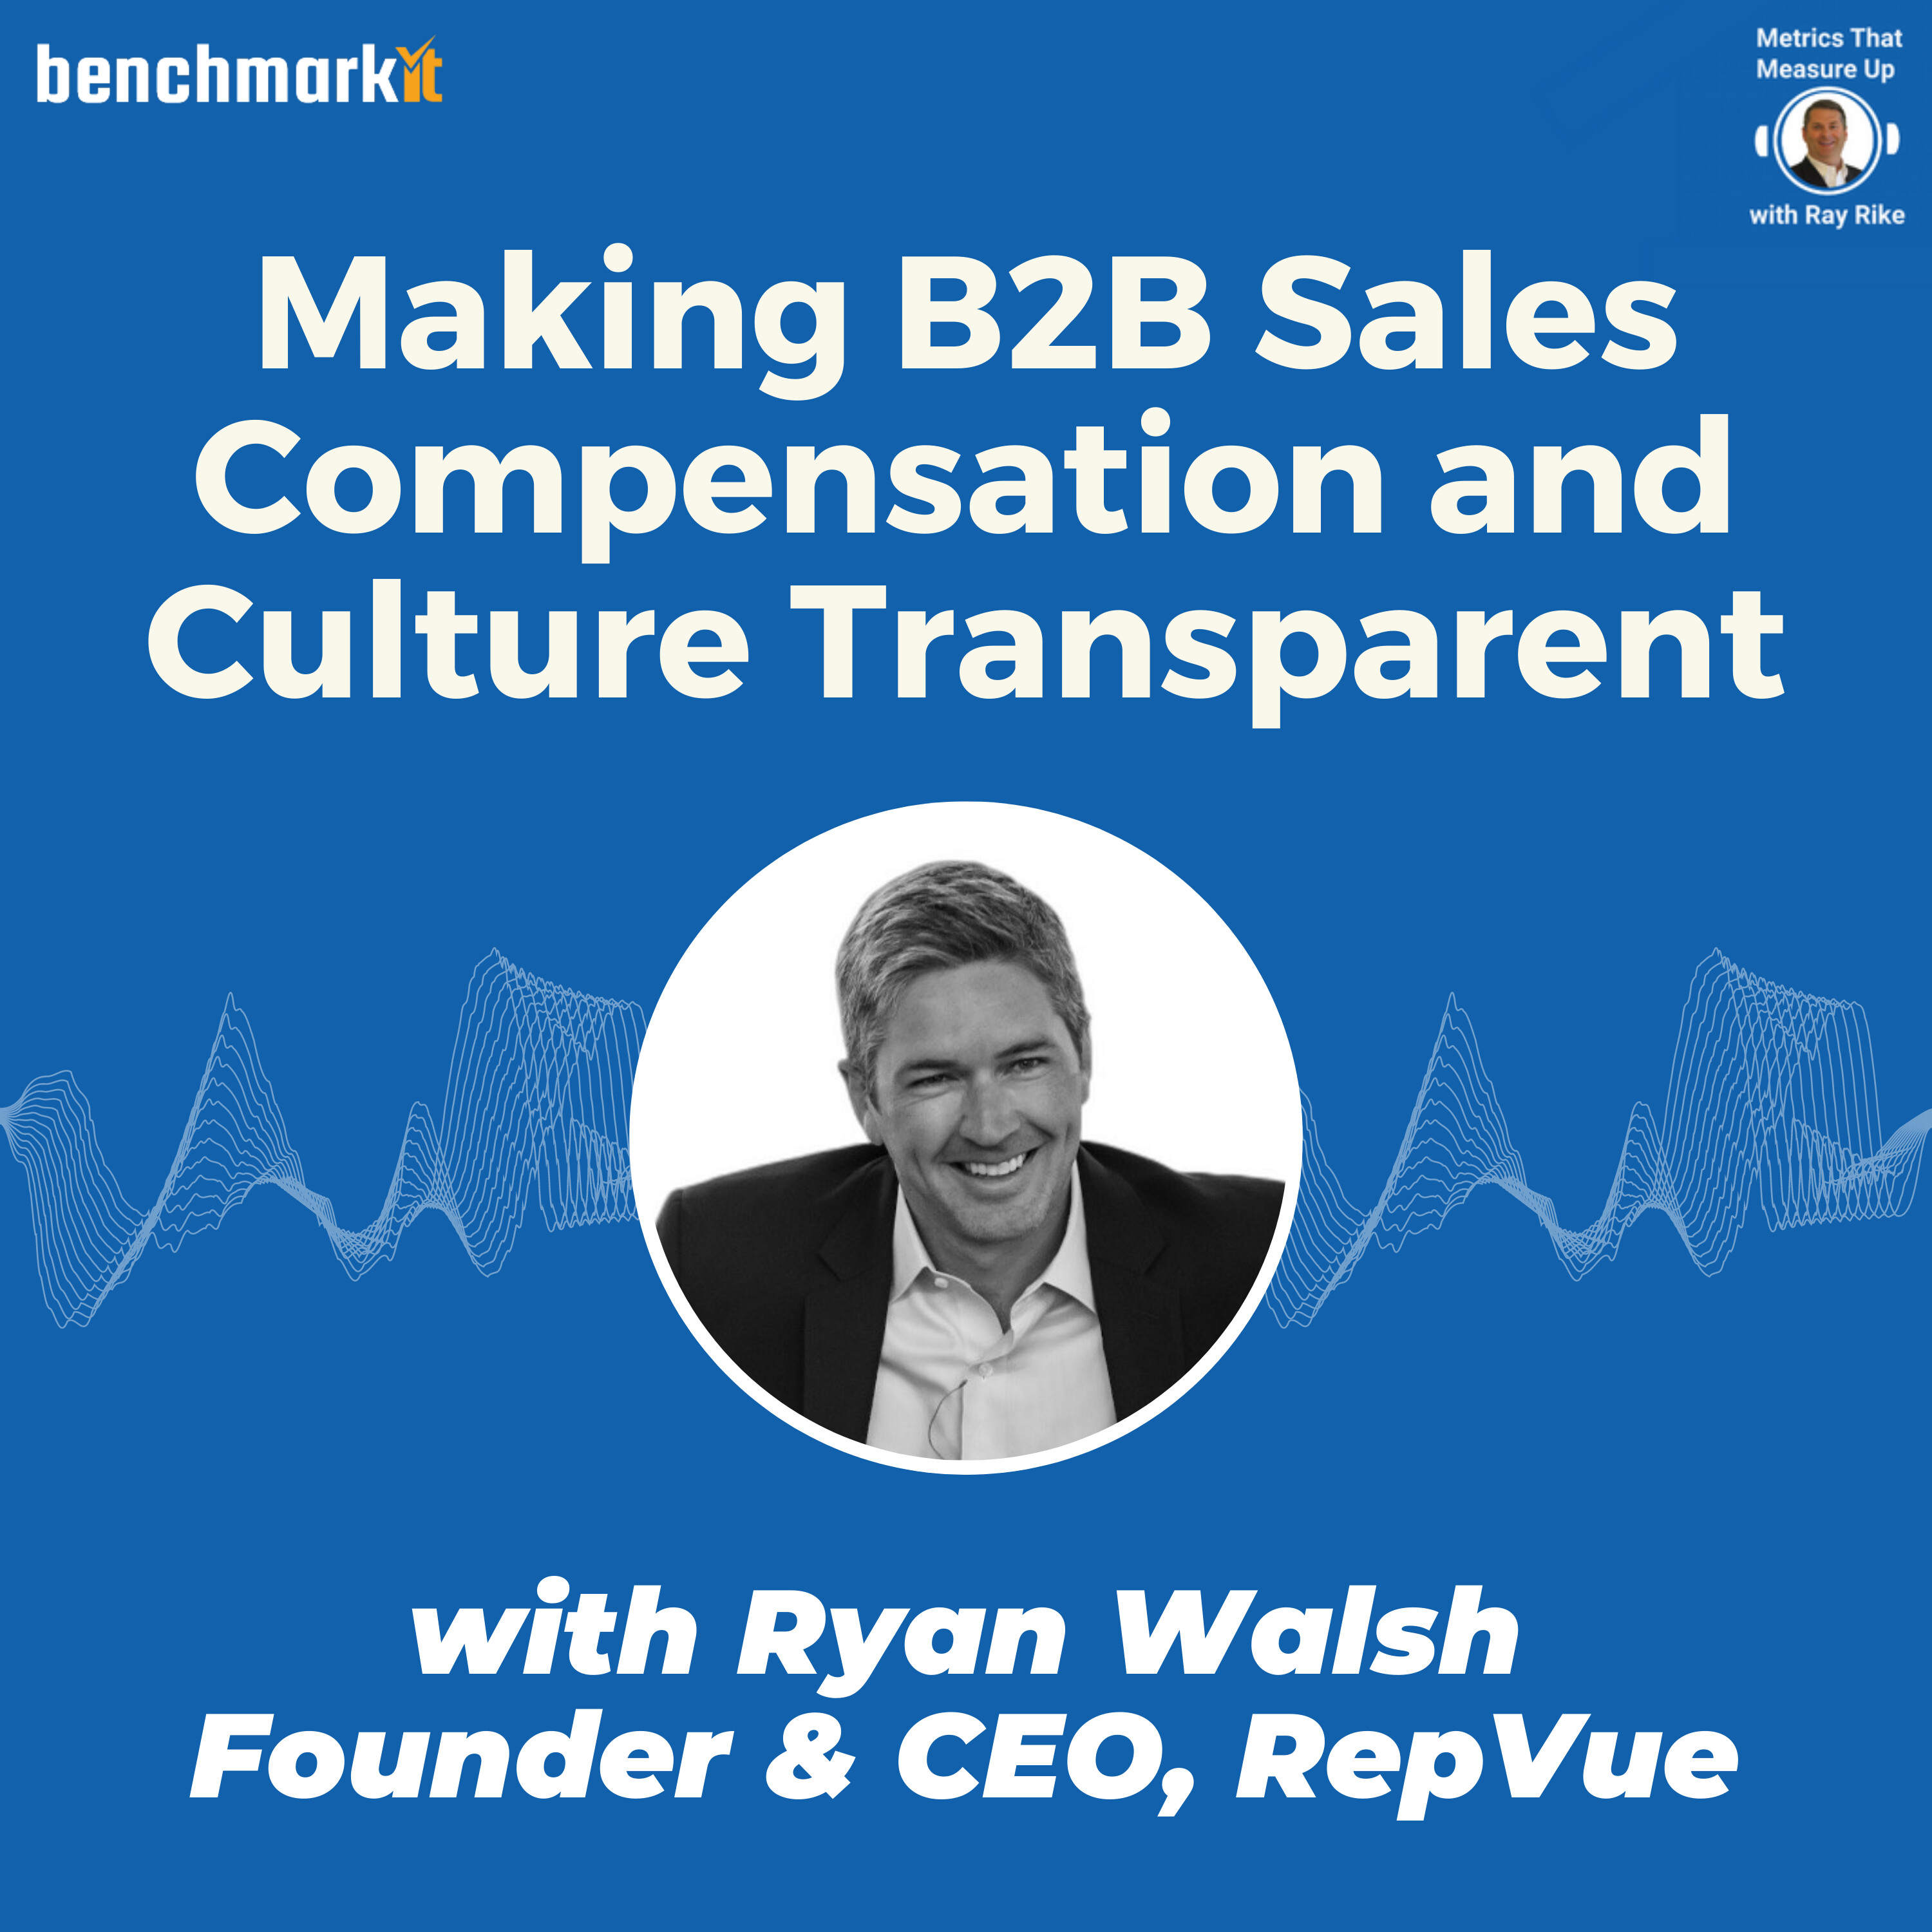 Making B2B Sales Compensation and Culture Transparent - with Ryan Walsh, Founder and CEO RepVue